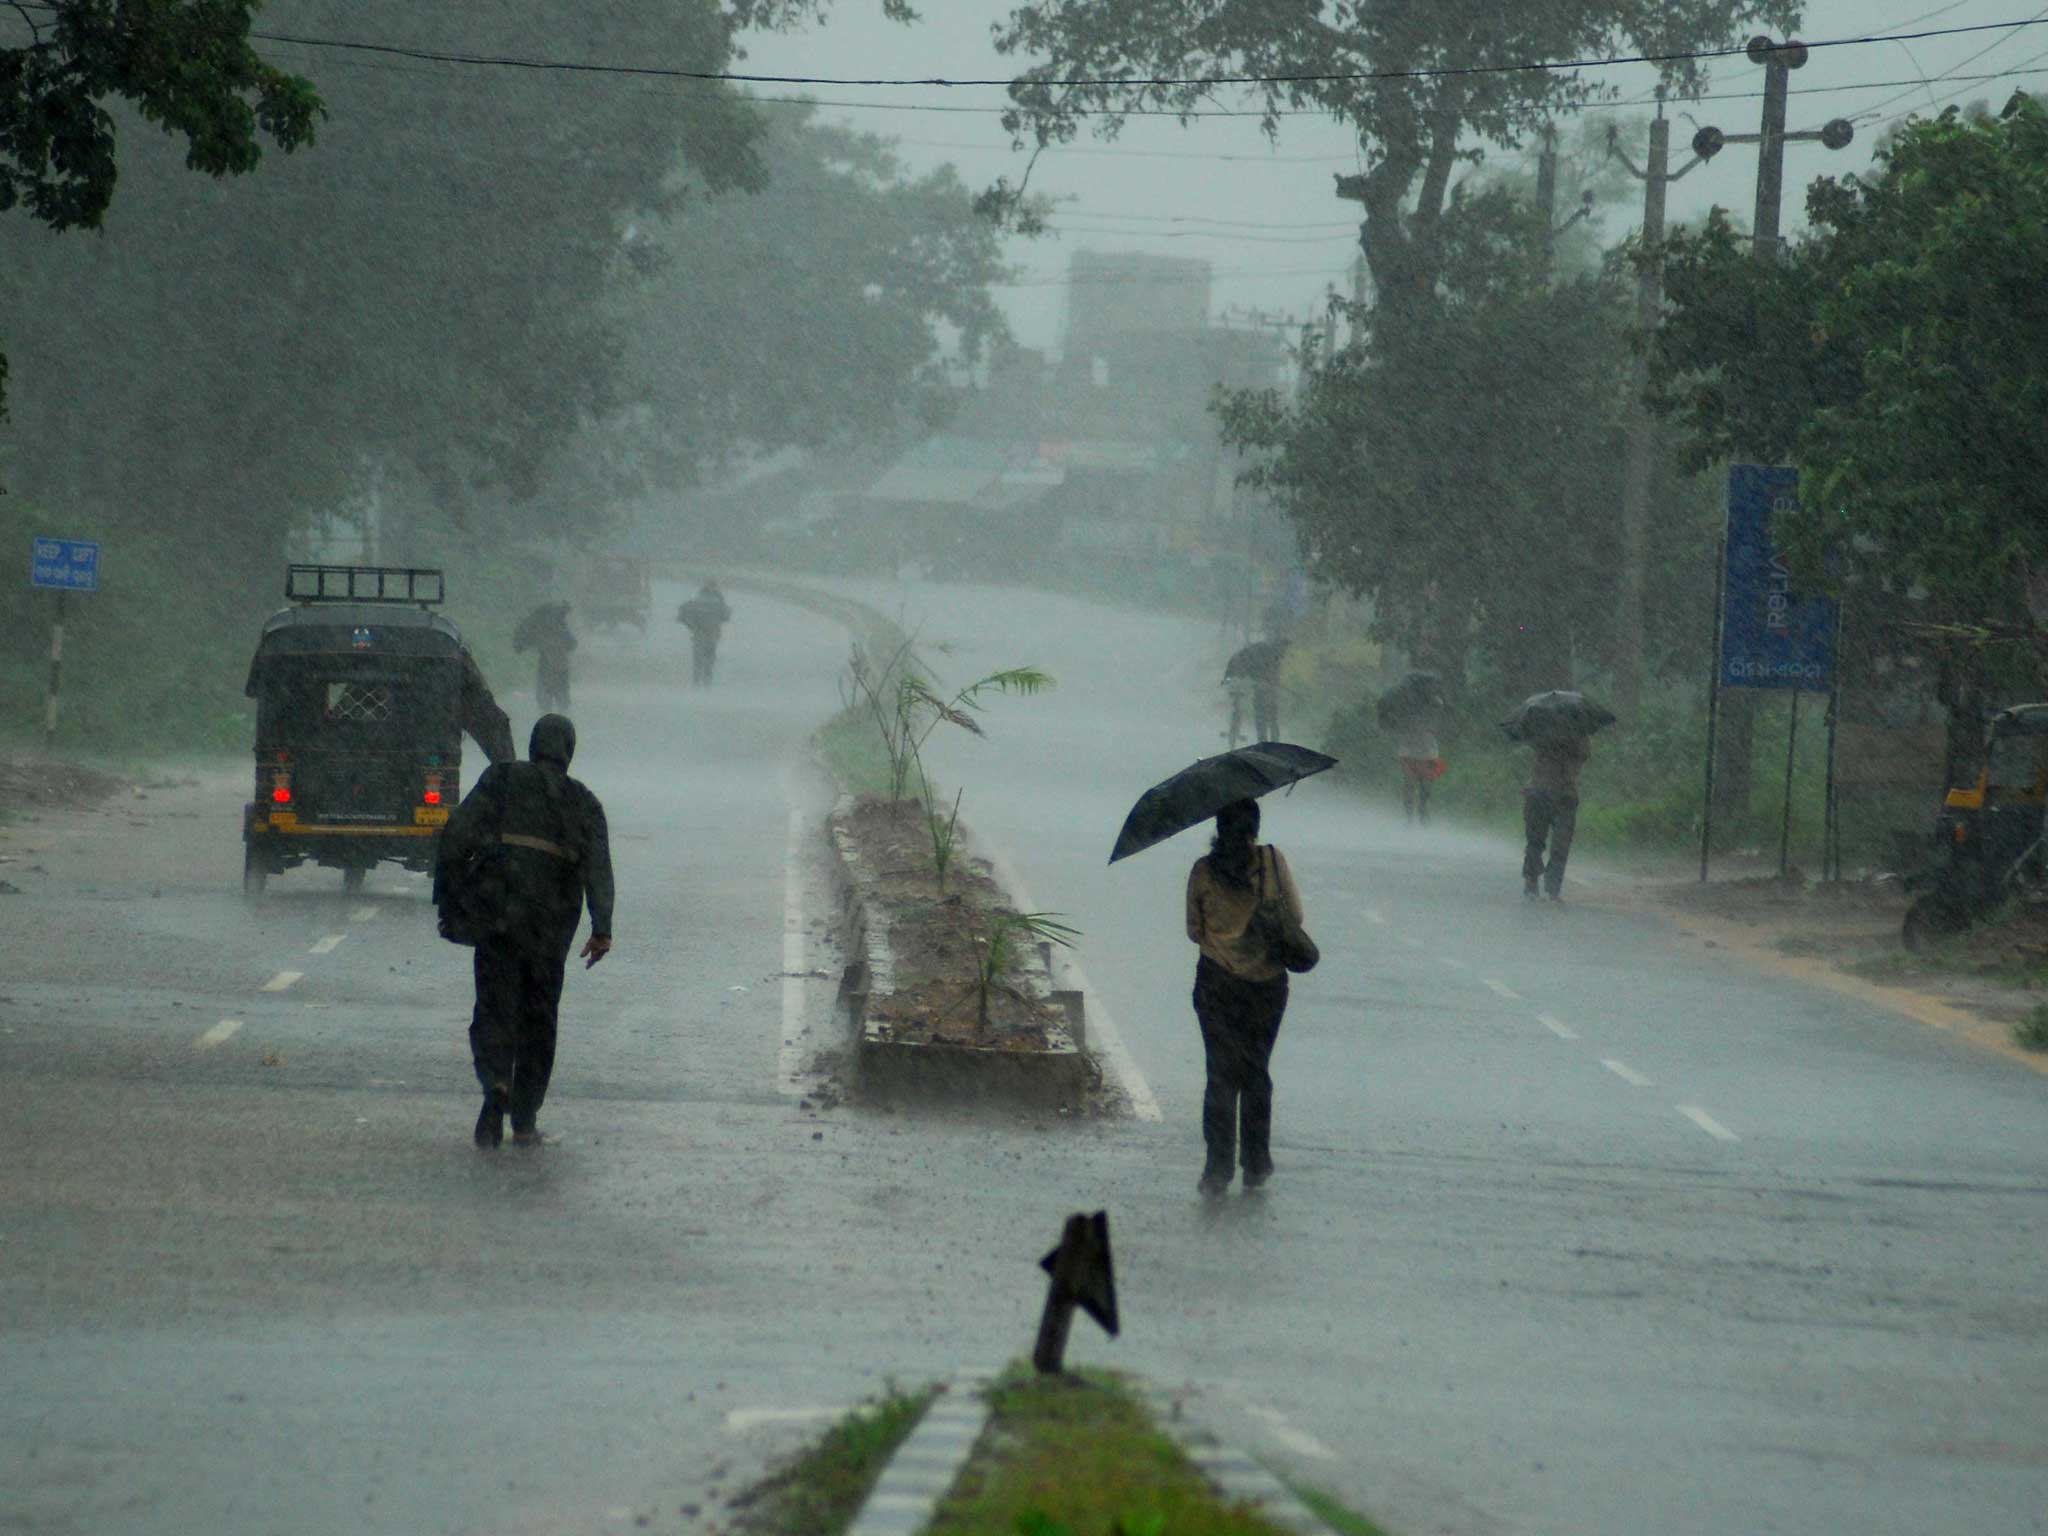 Indians return to their homes during a heavy cyclone rain in Berhampur city